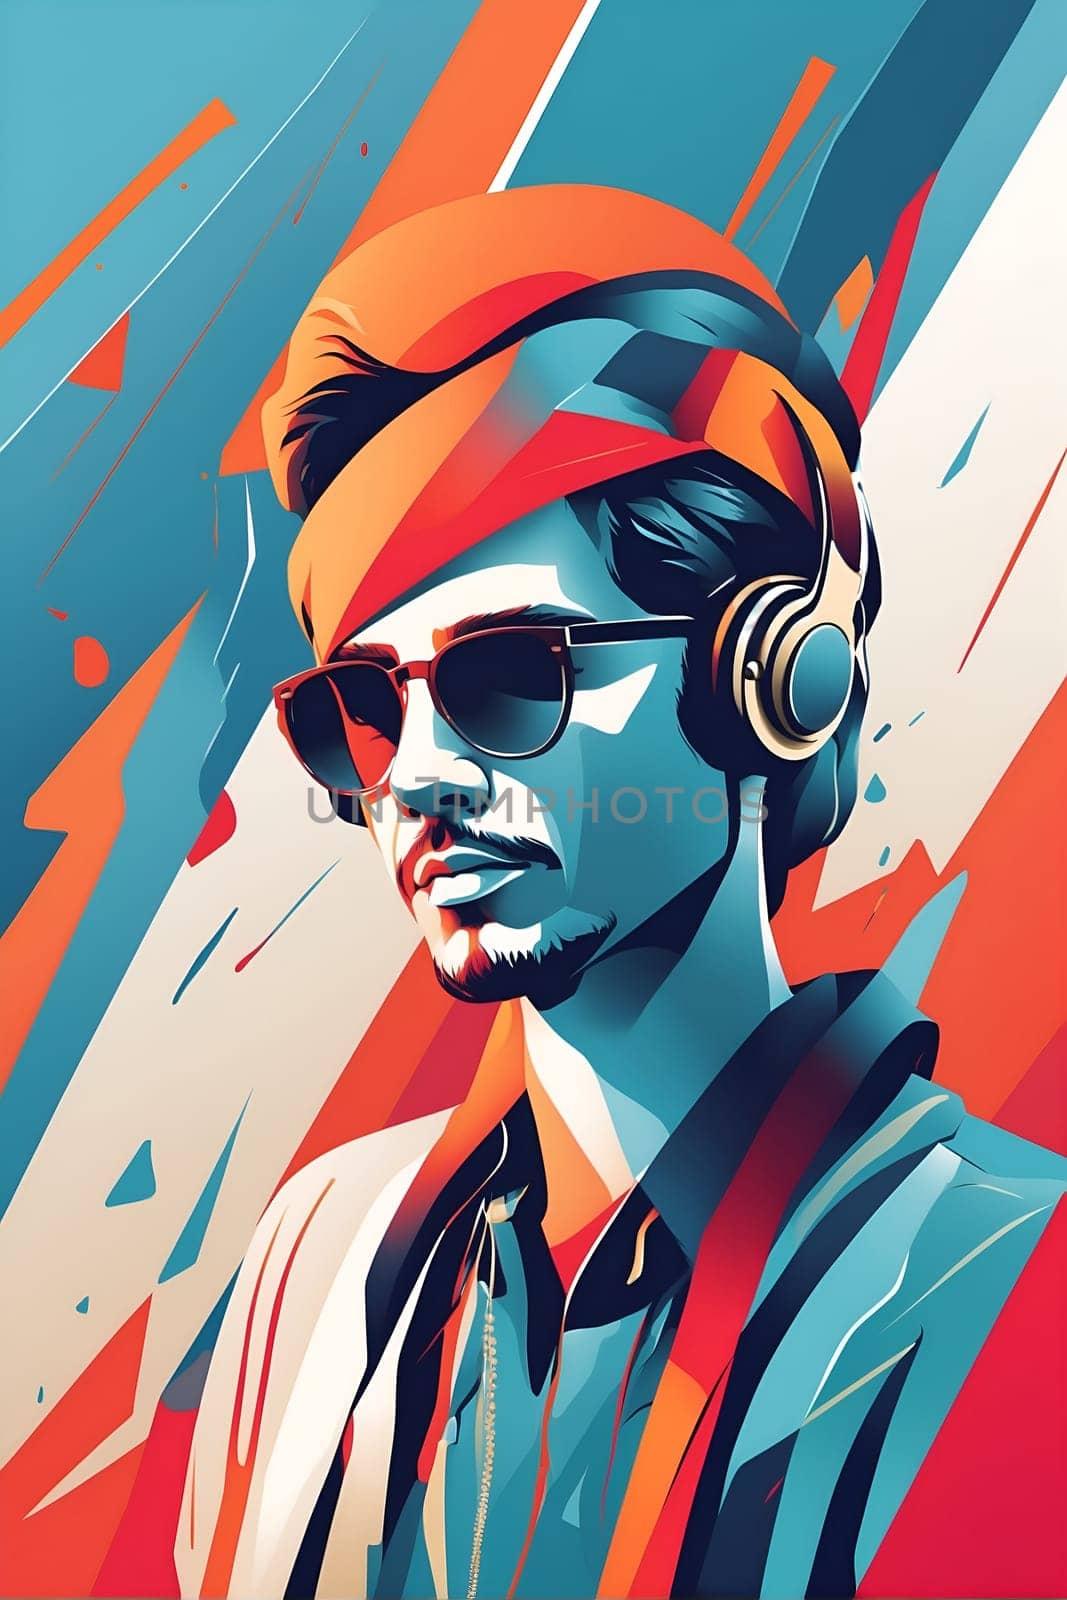 This lively painting showcases a man wearing headphones, immersed in his own musical world.